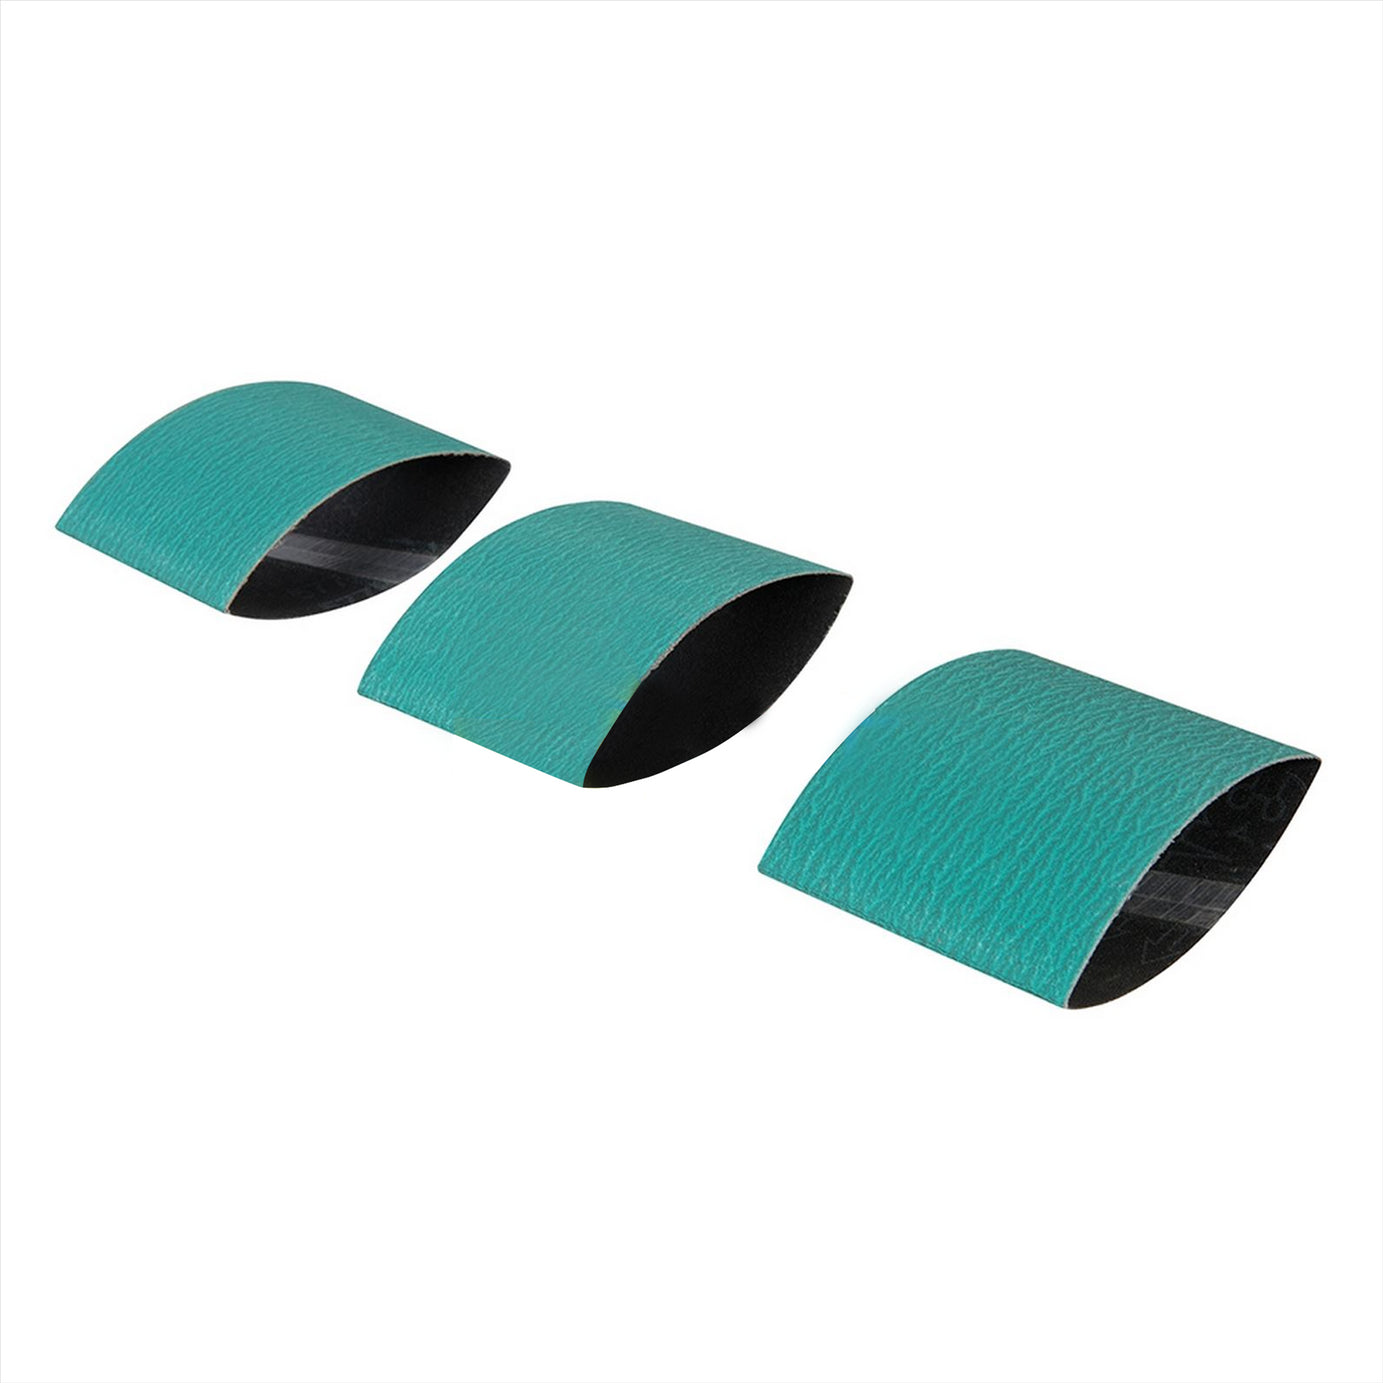 Sanding Sleeves 3Pk 120 Grit Compatible With Gmc 1200W Burnisher Drum Sander